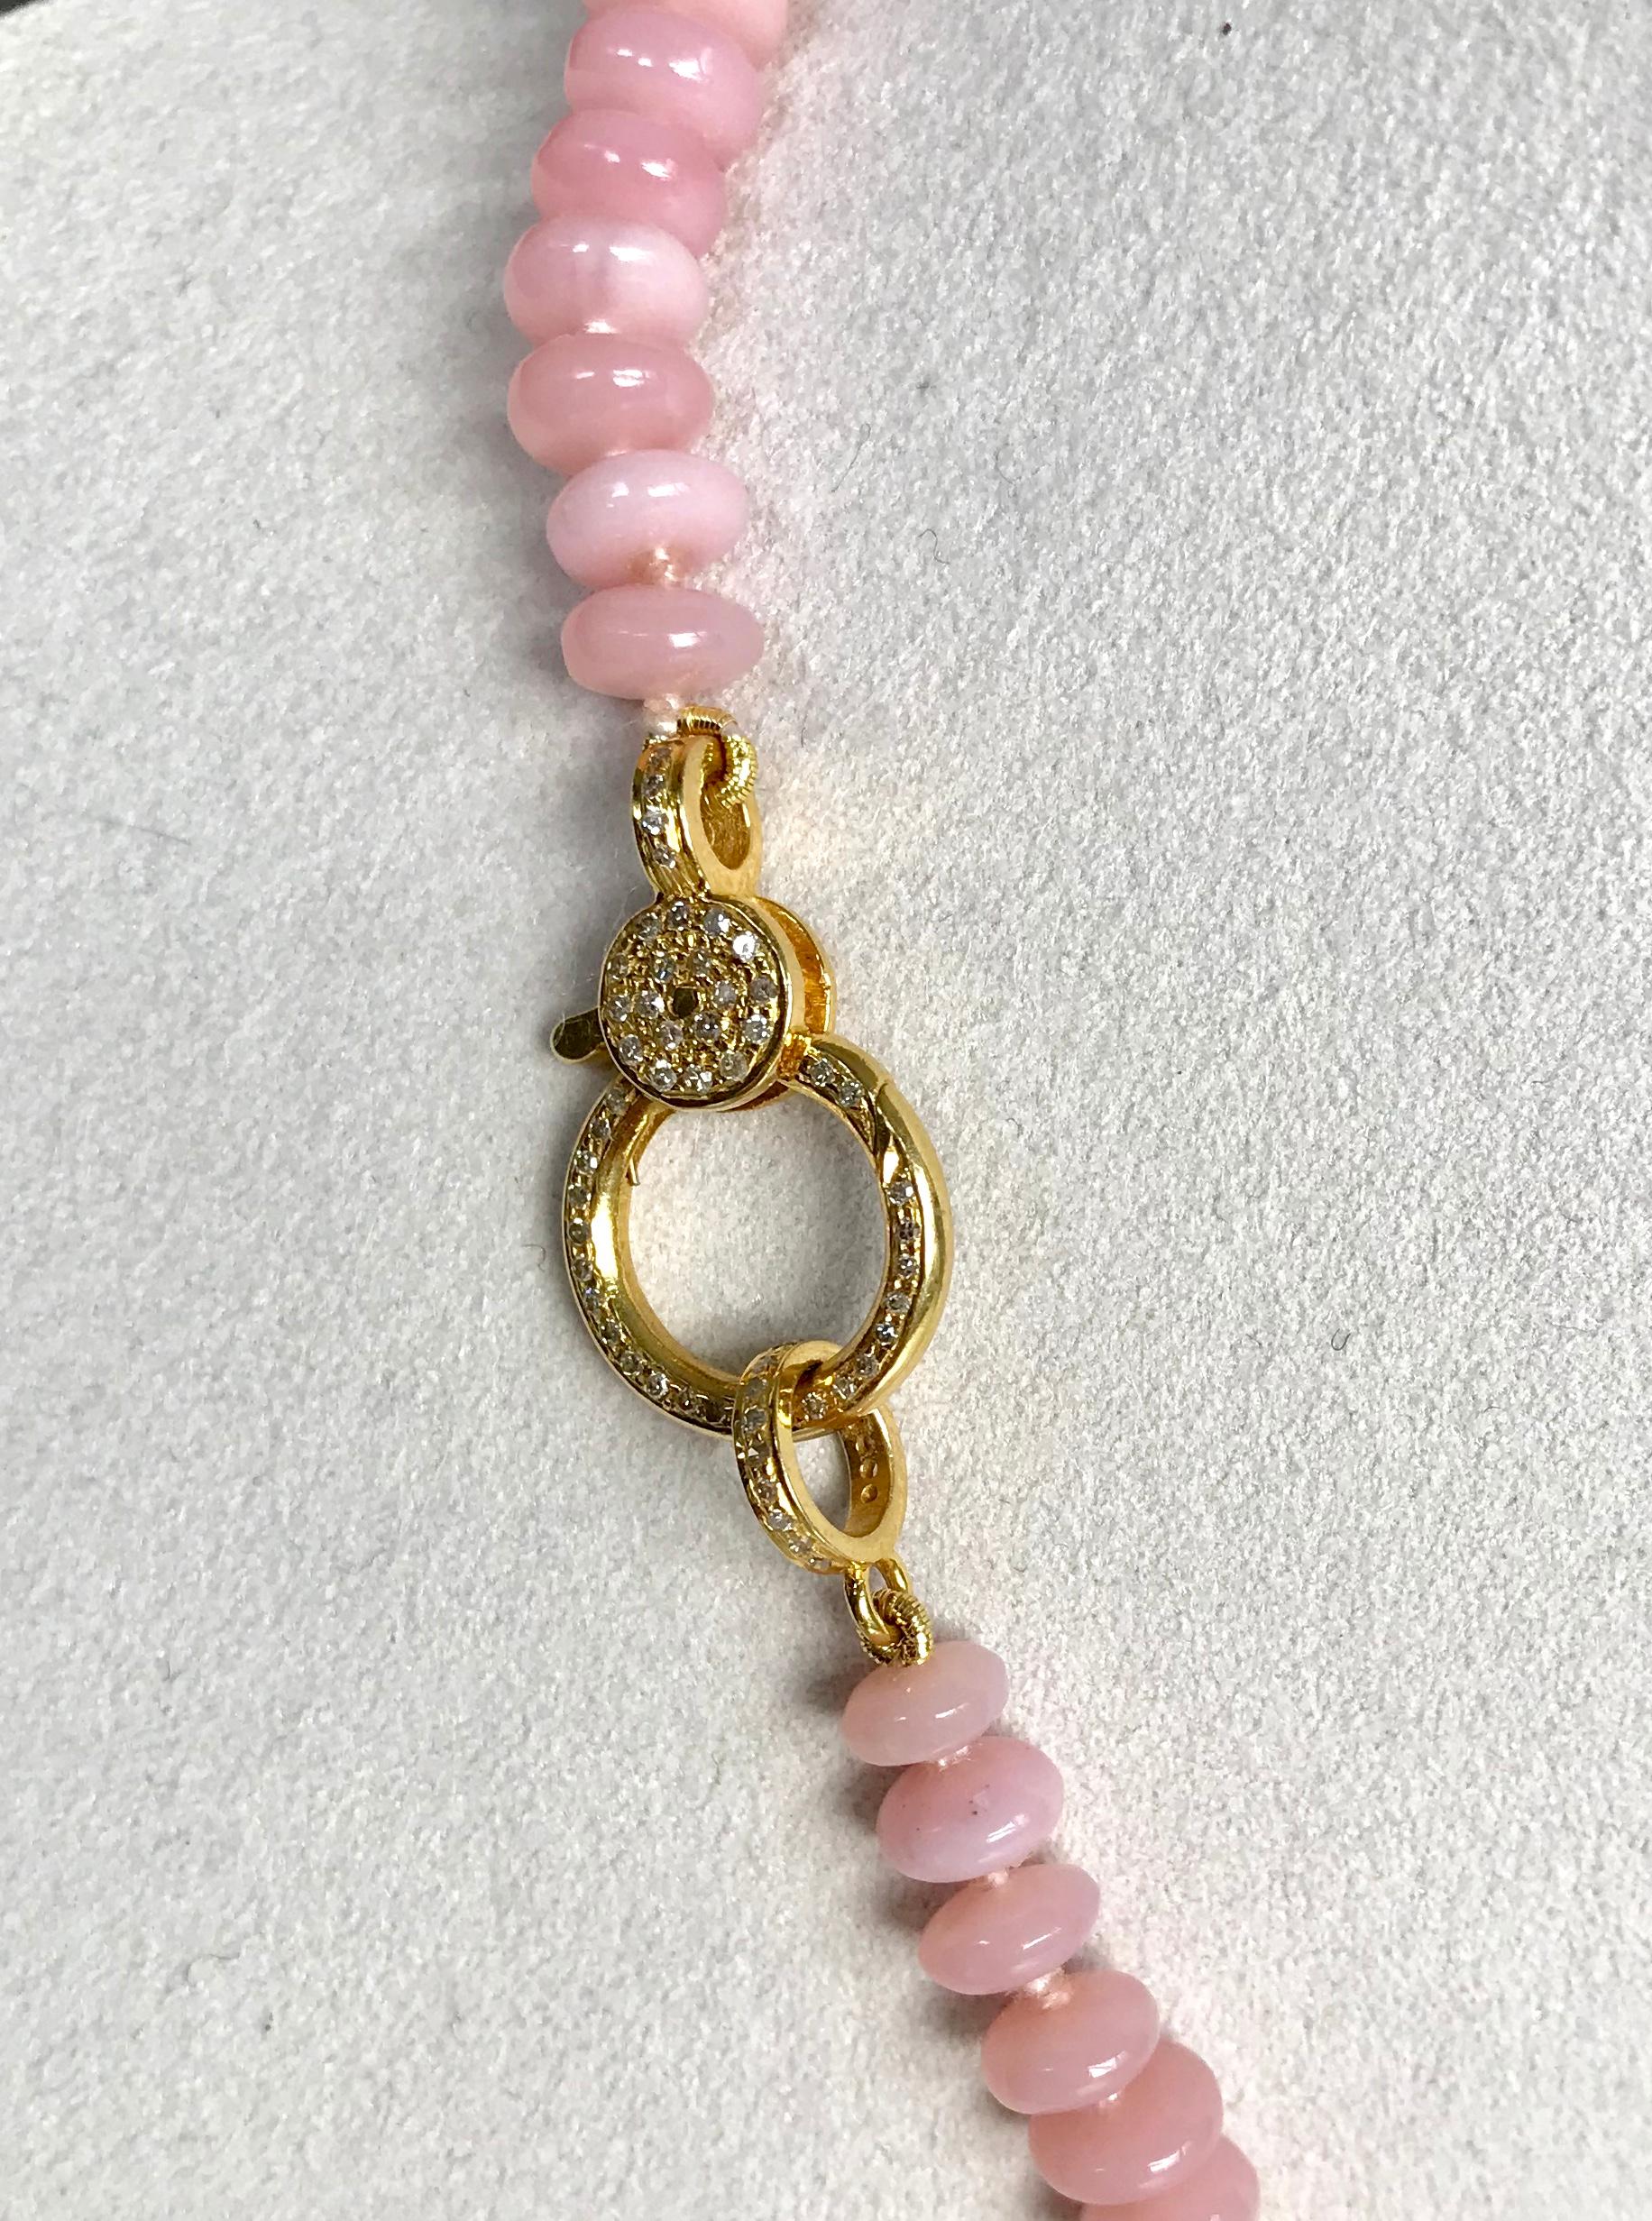  14 Karat Yellow Gold Pink Opal Beaded Necklace with Diamond Beads and Clasp 2